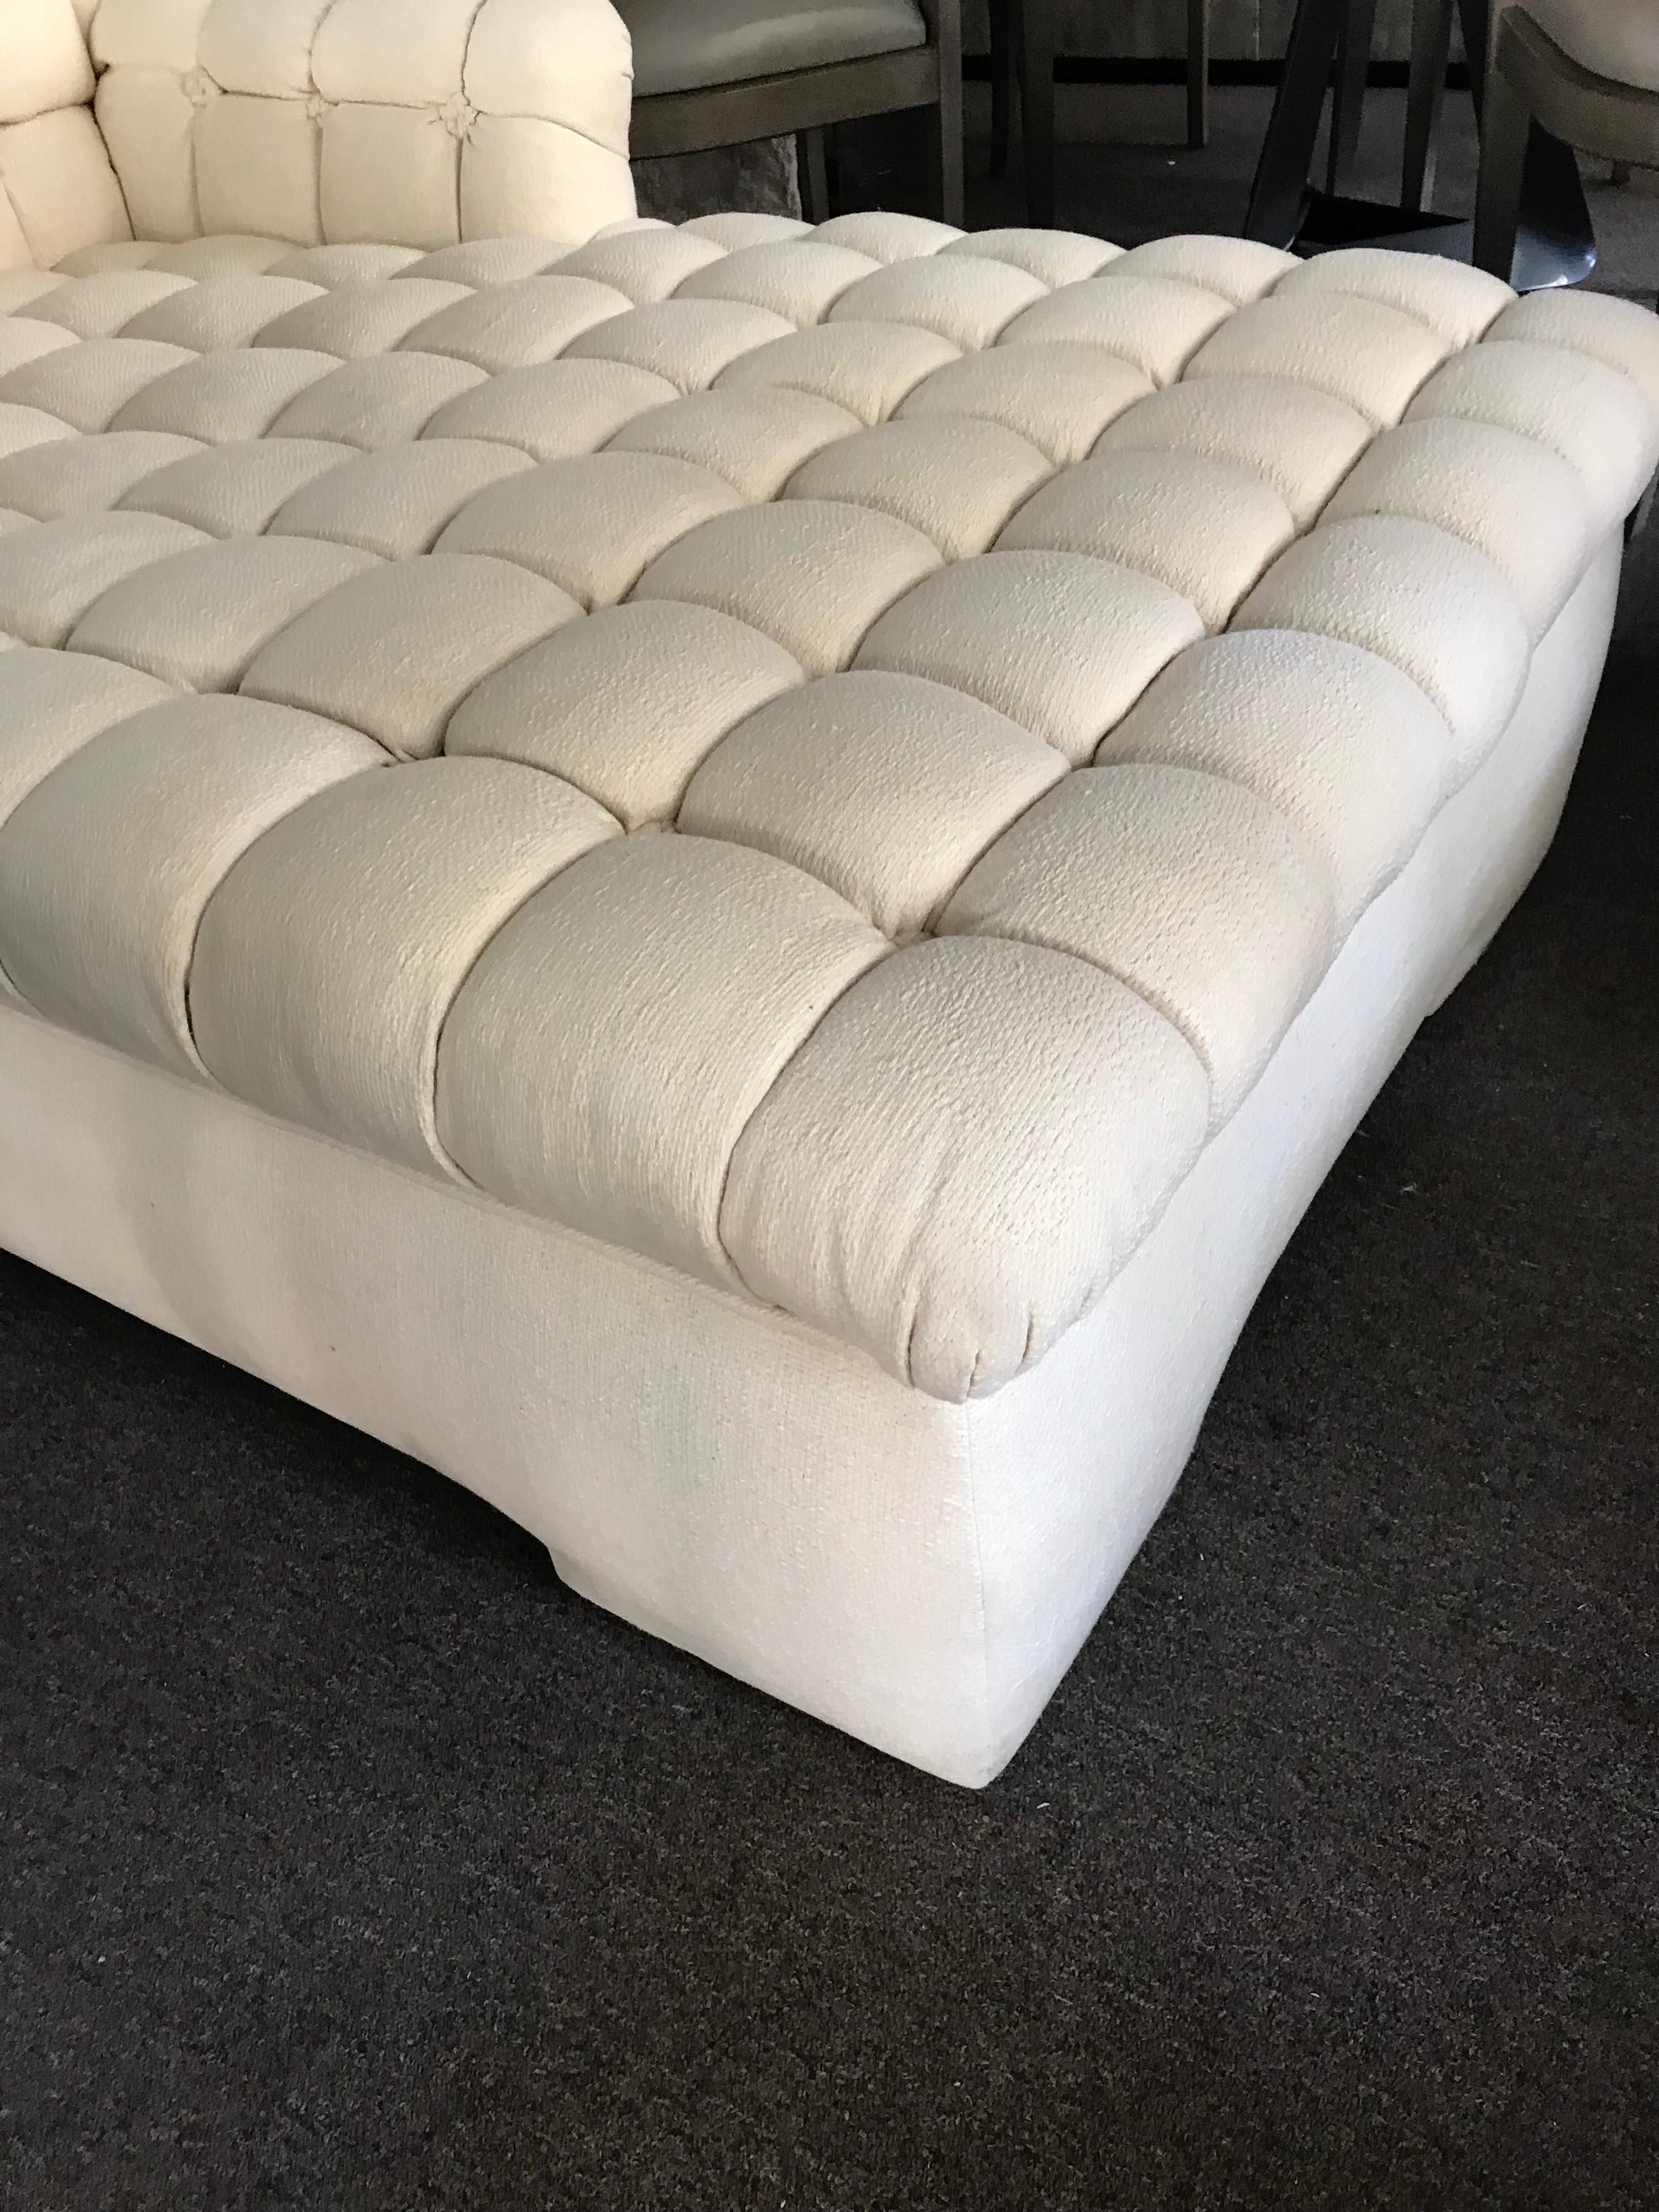 Late 20th Century Rare Original Steve Chase Marshmallow Tufted Chaise Lounge Made by A. Rudin